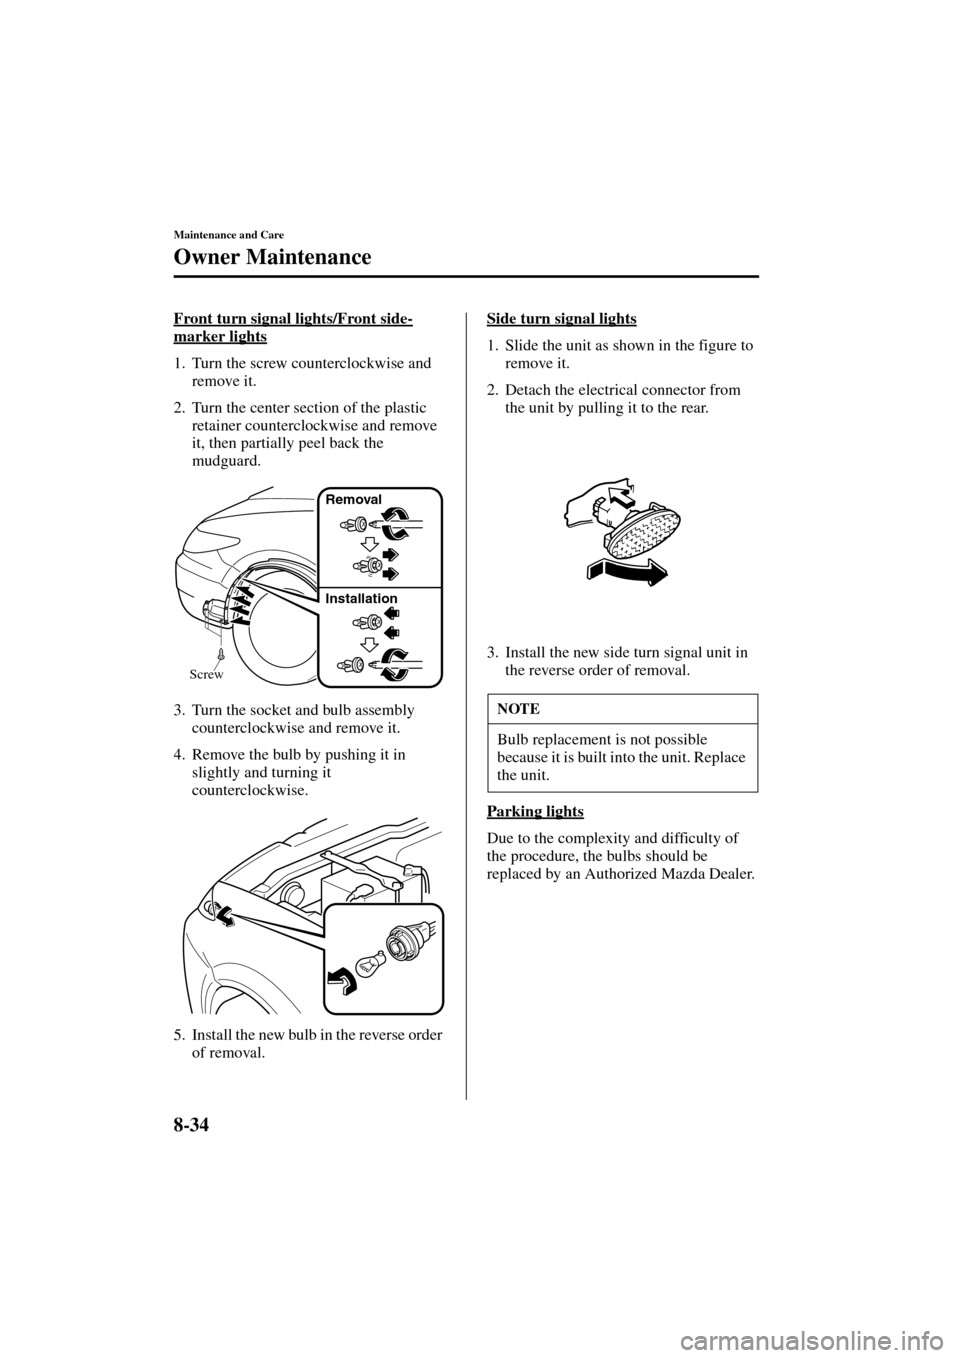 MAZDA MODEL MPV 2004  Owners Manual (in English) 8-34
Maintenance and Care
Owner Maintenance
Form No. 8S06-EA-03H
Front turn signal lights/Front side-
marker lights
1. Turn the screw counterclockwise and 
remove it.
2. Turn the center section of the